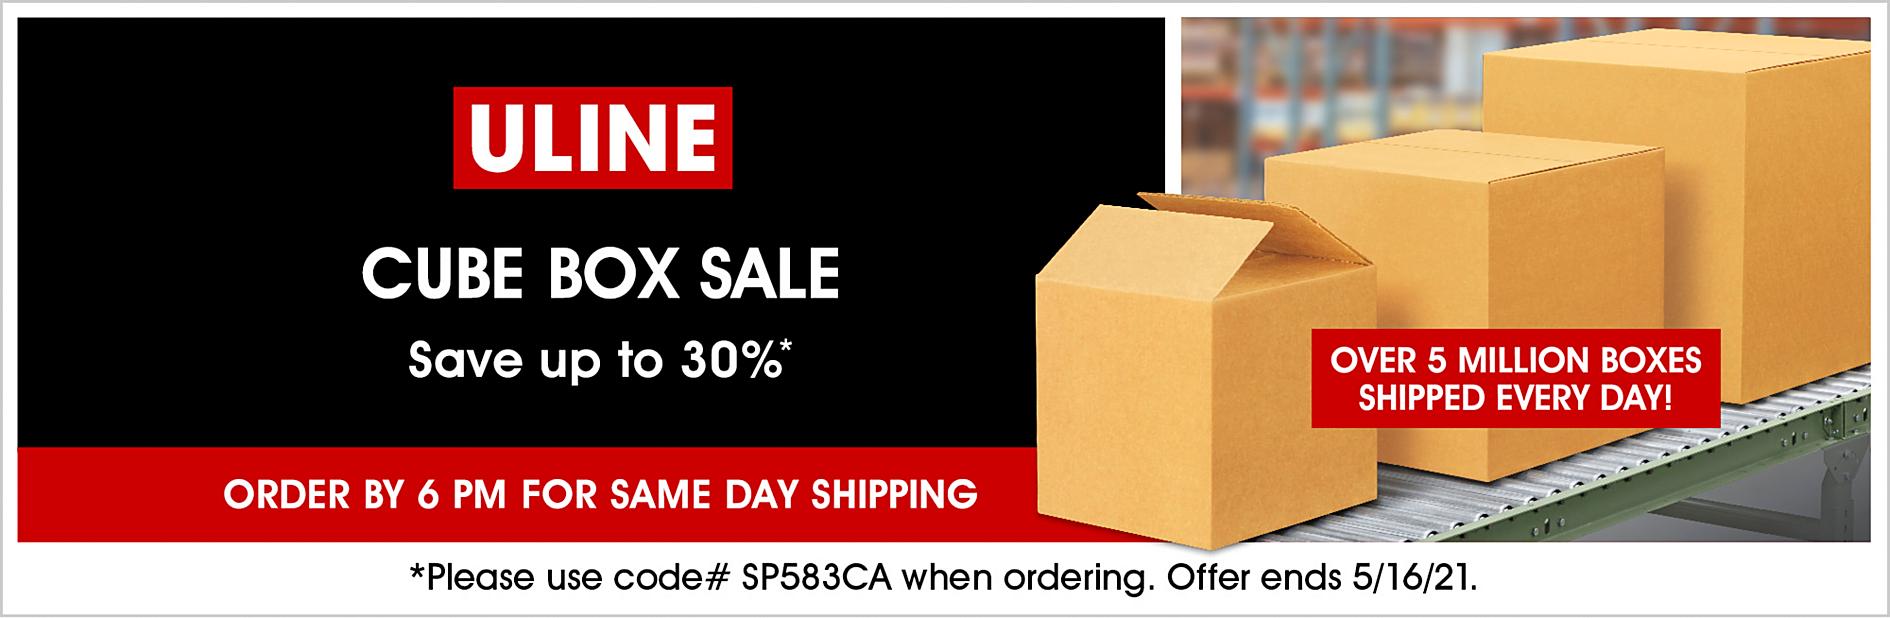 SP583CA Cube Box Sale, Save up to 30%, Use code SP583CA, Offer ends 5/16/21